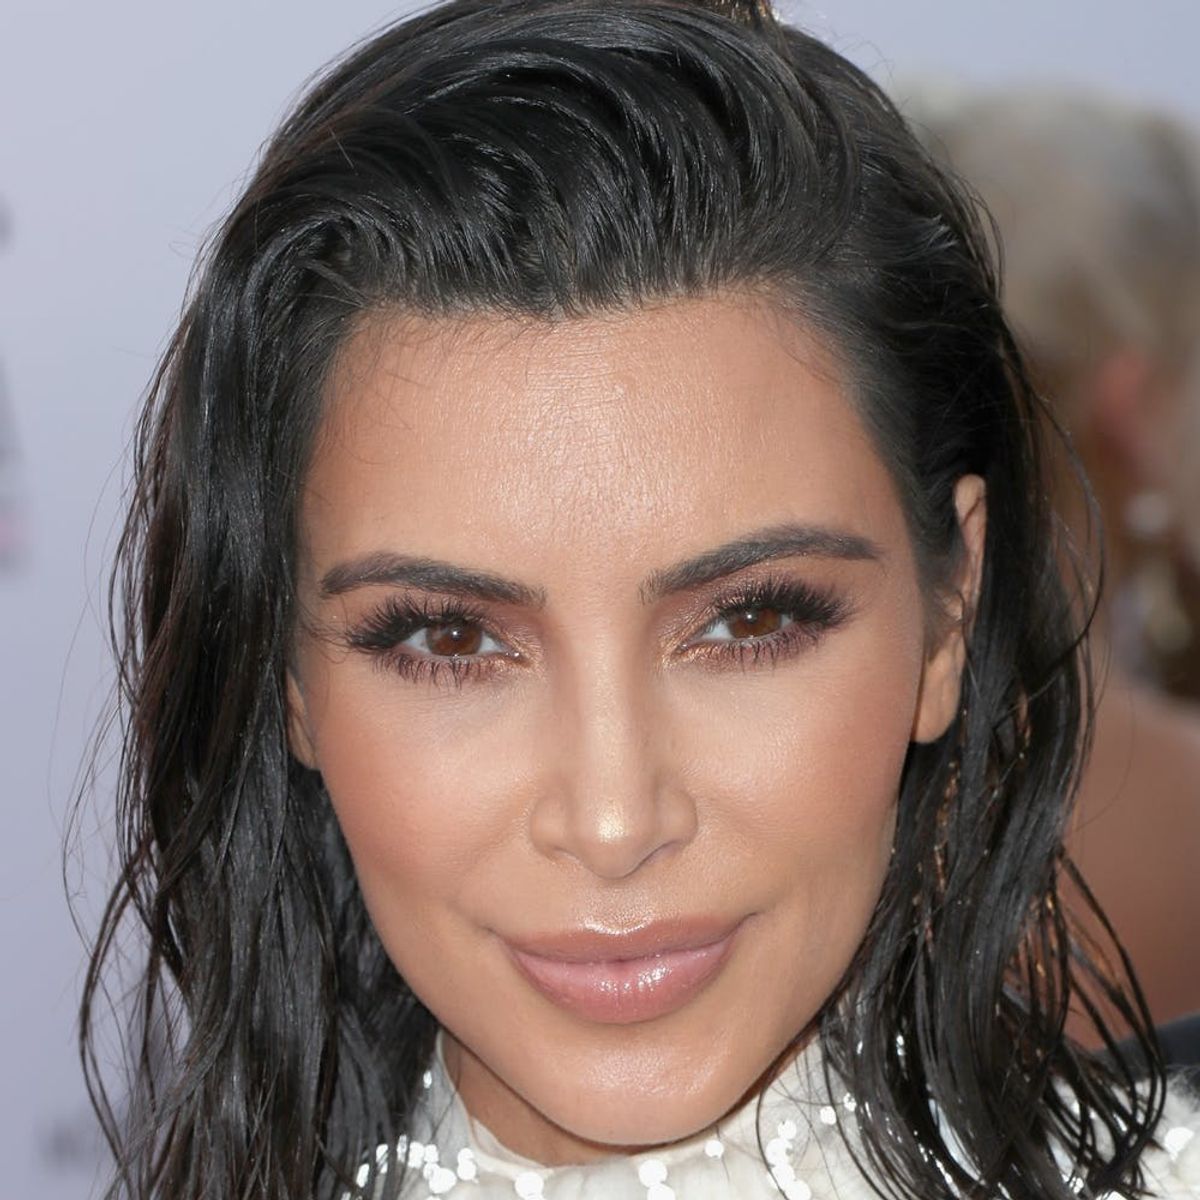 Kim Kardashian West Just Made a Major Change to Her Signature Look